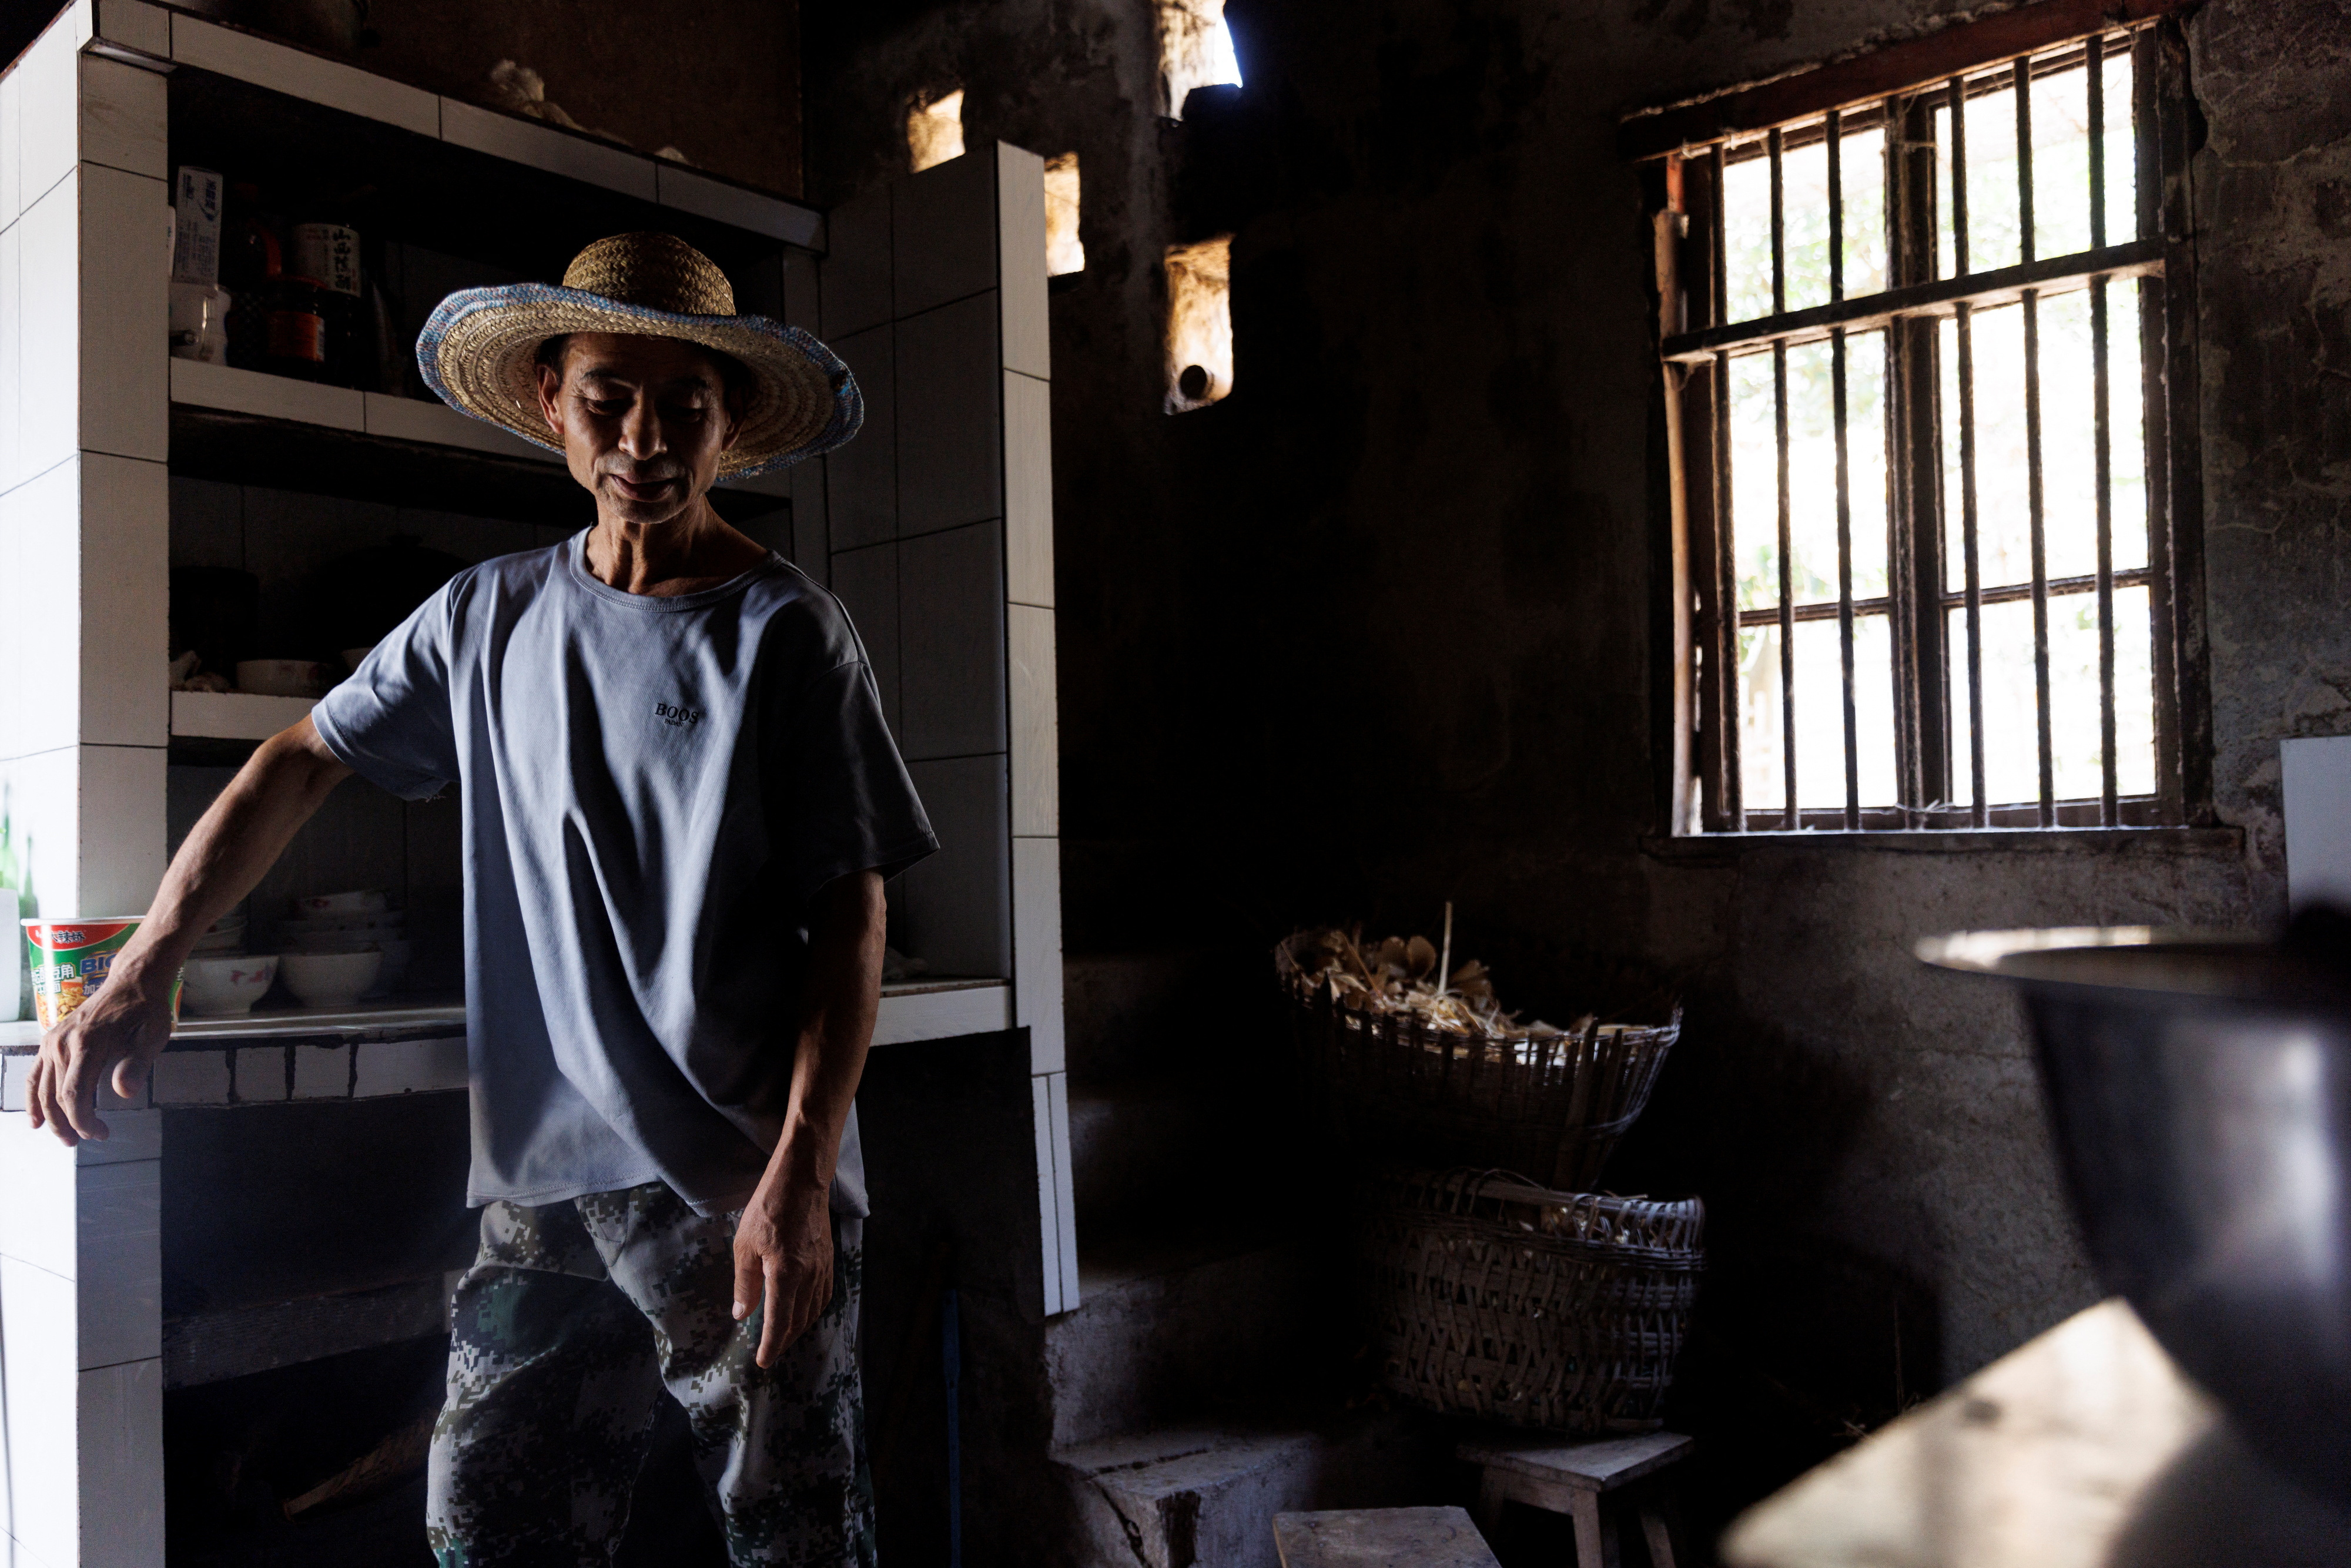 Local farmer Chen Xiaohua, 68, stands in his house where the water has been turned off as the region is experiencing a drought in Fuyuan village in Chongqing